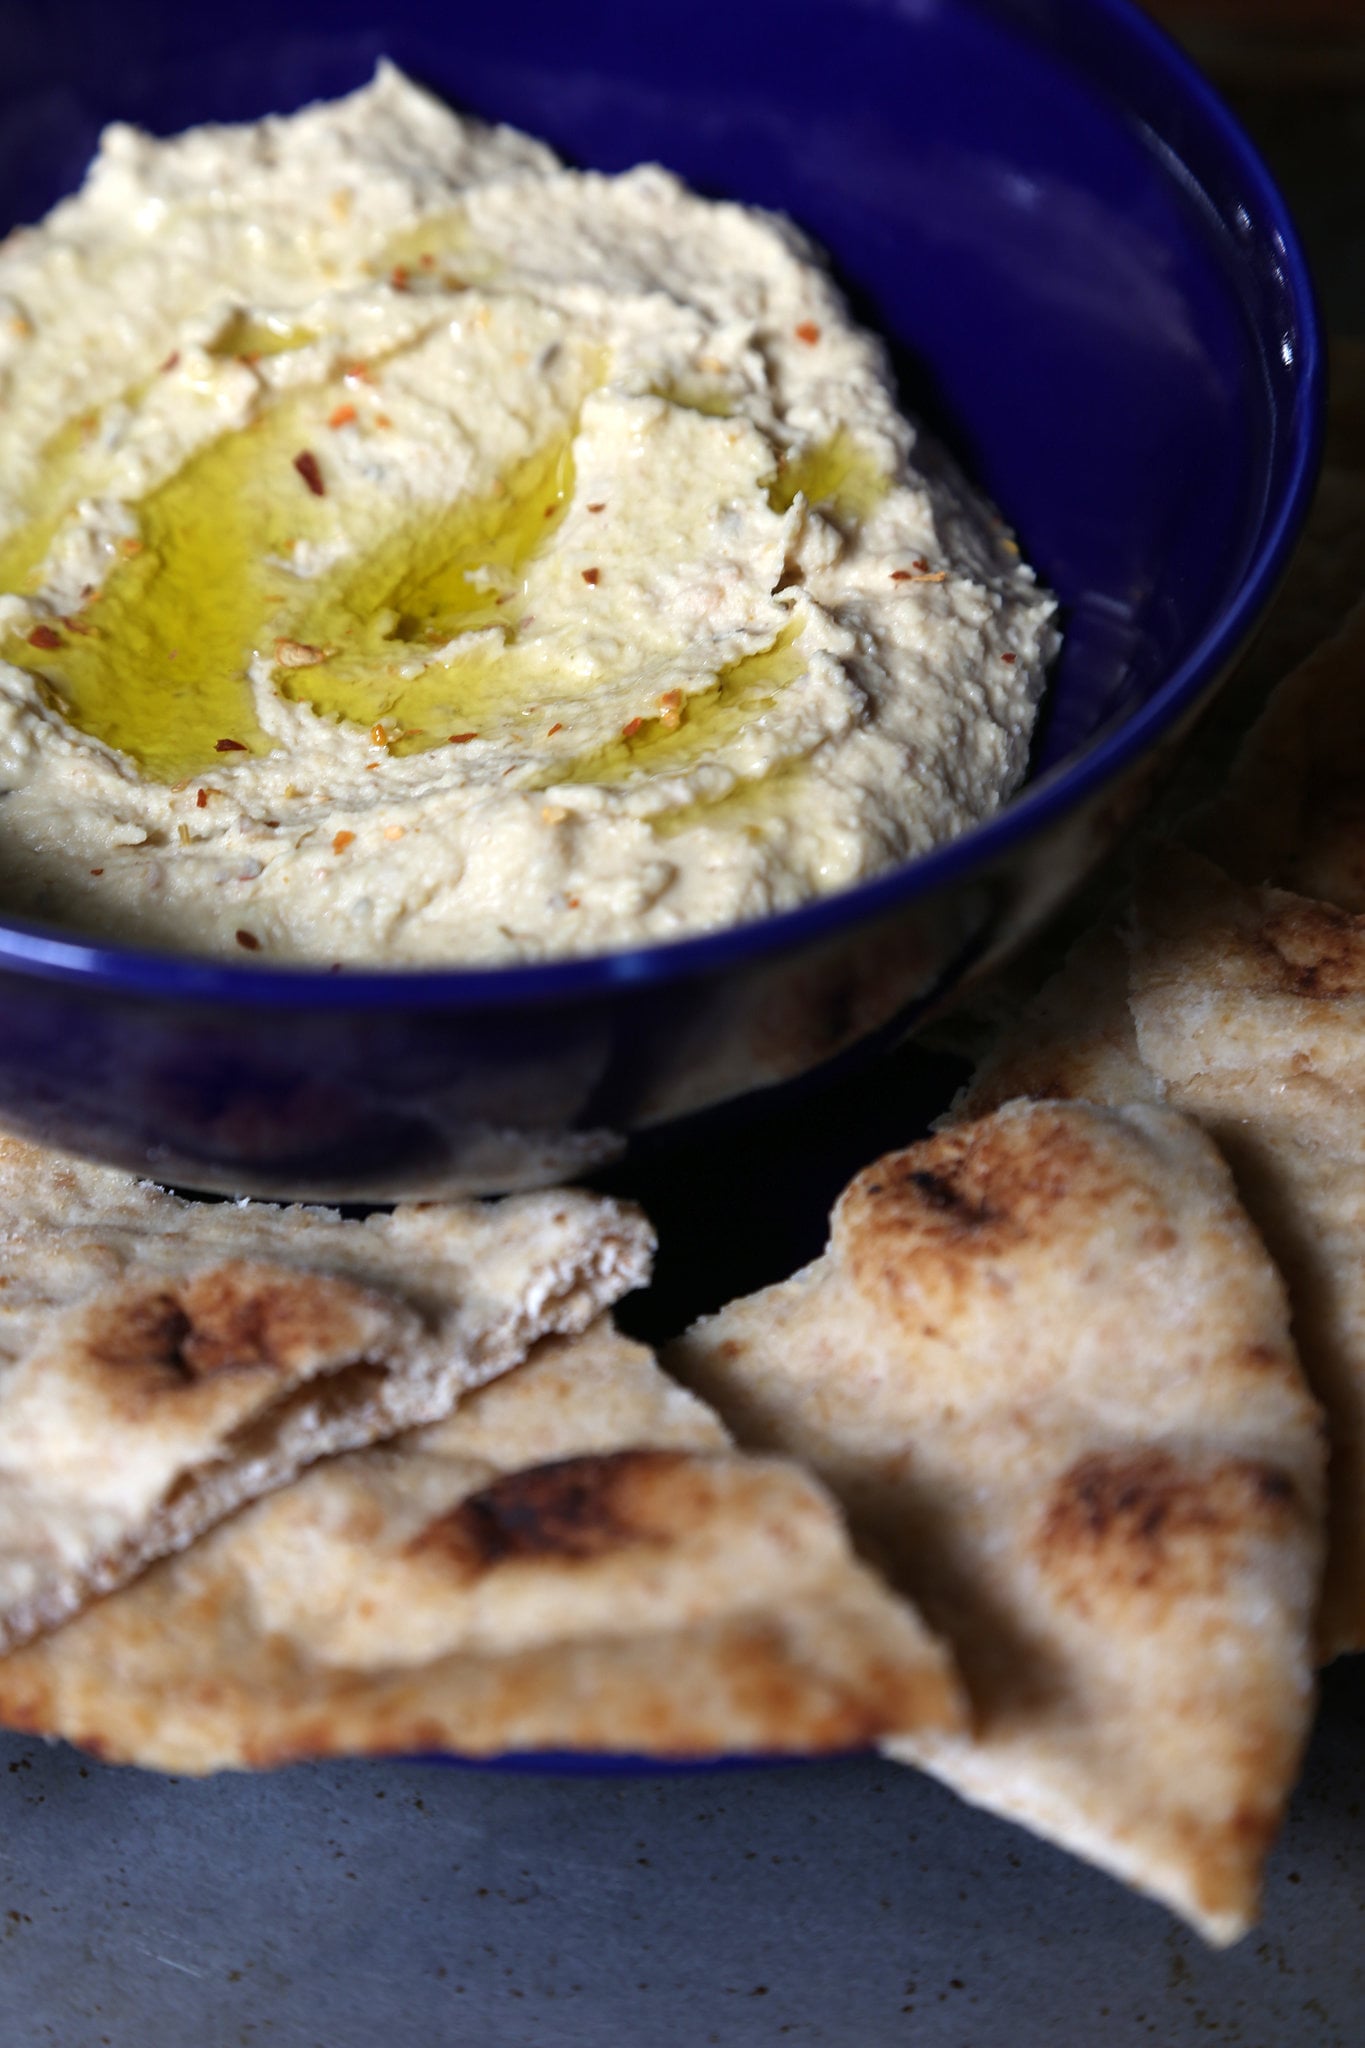 Spicy Hummus | 50 Dips For Delish Dunking | POPSUGAR Food